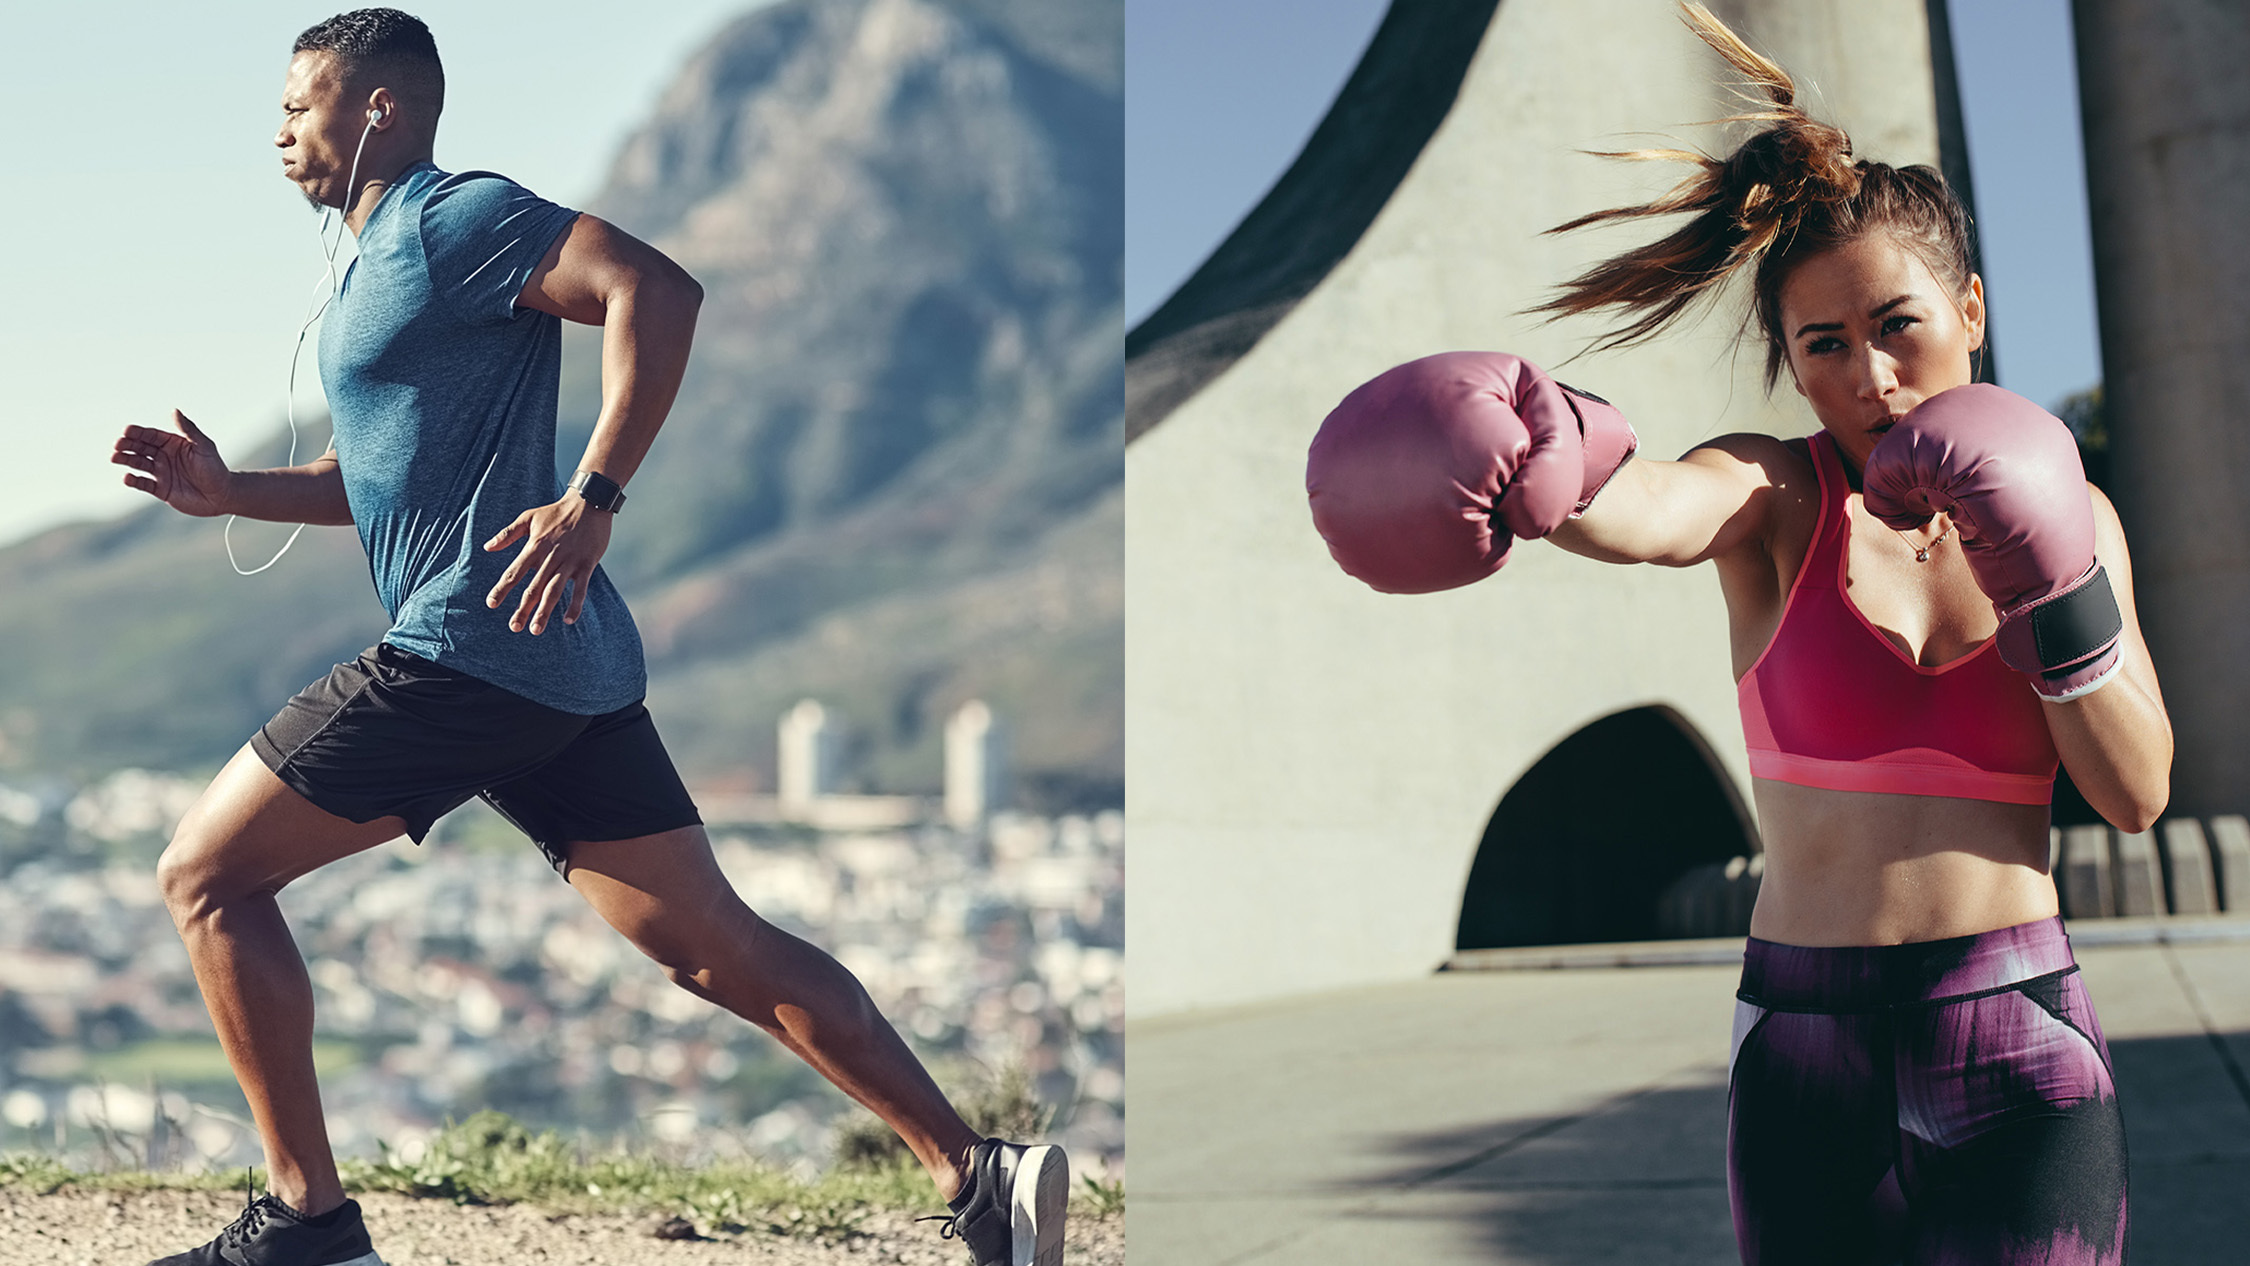 Is Boxing Better Than Running?